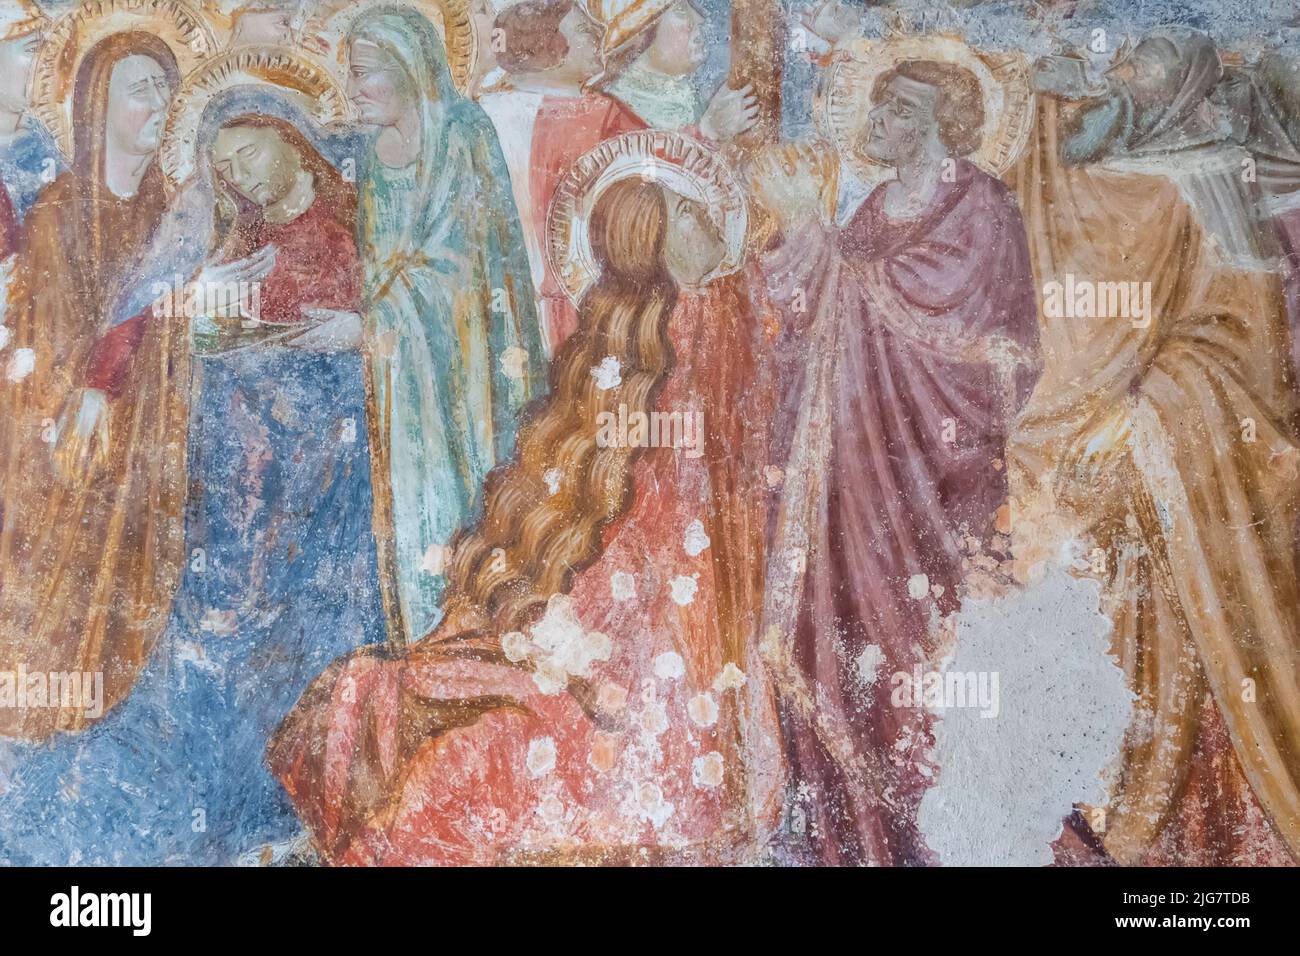 Old religious frescoes in the Cloister of Paradise, Amalfi Cathedral, Campania, Italy Stock Photo